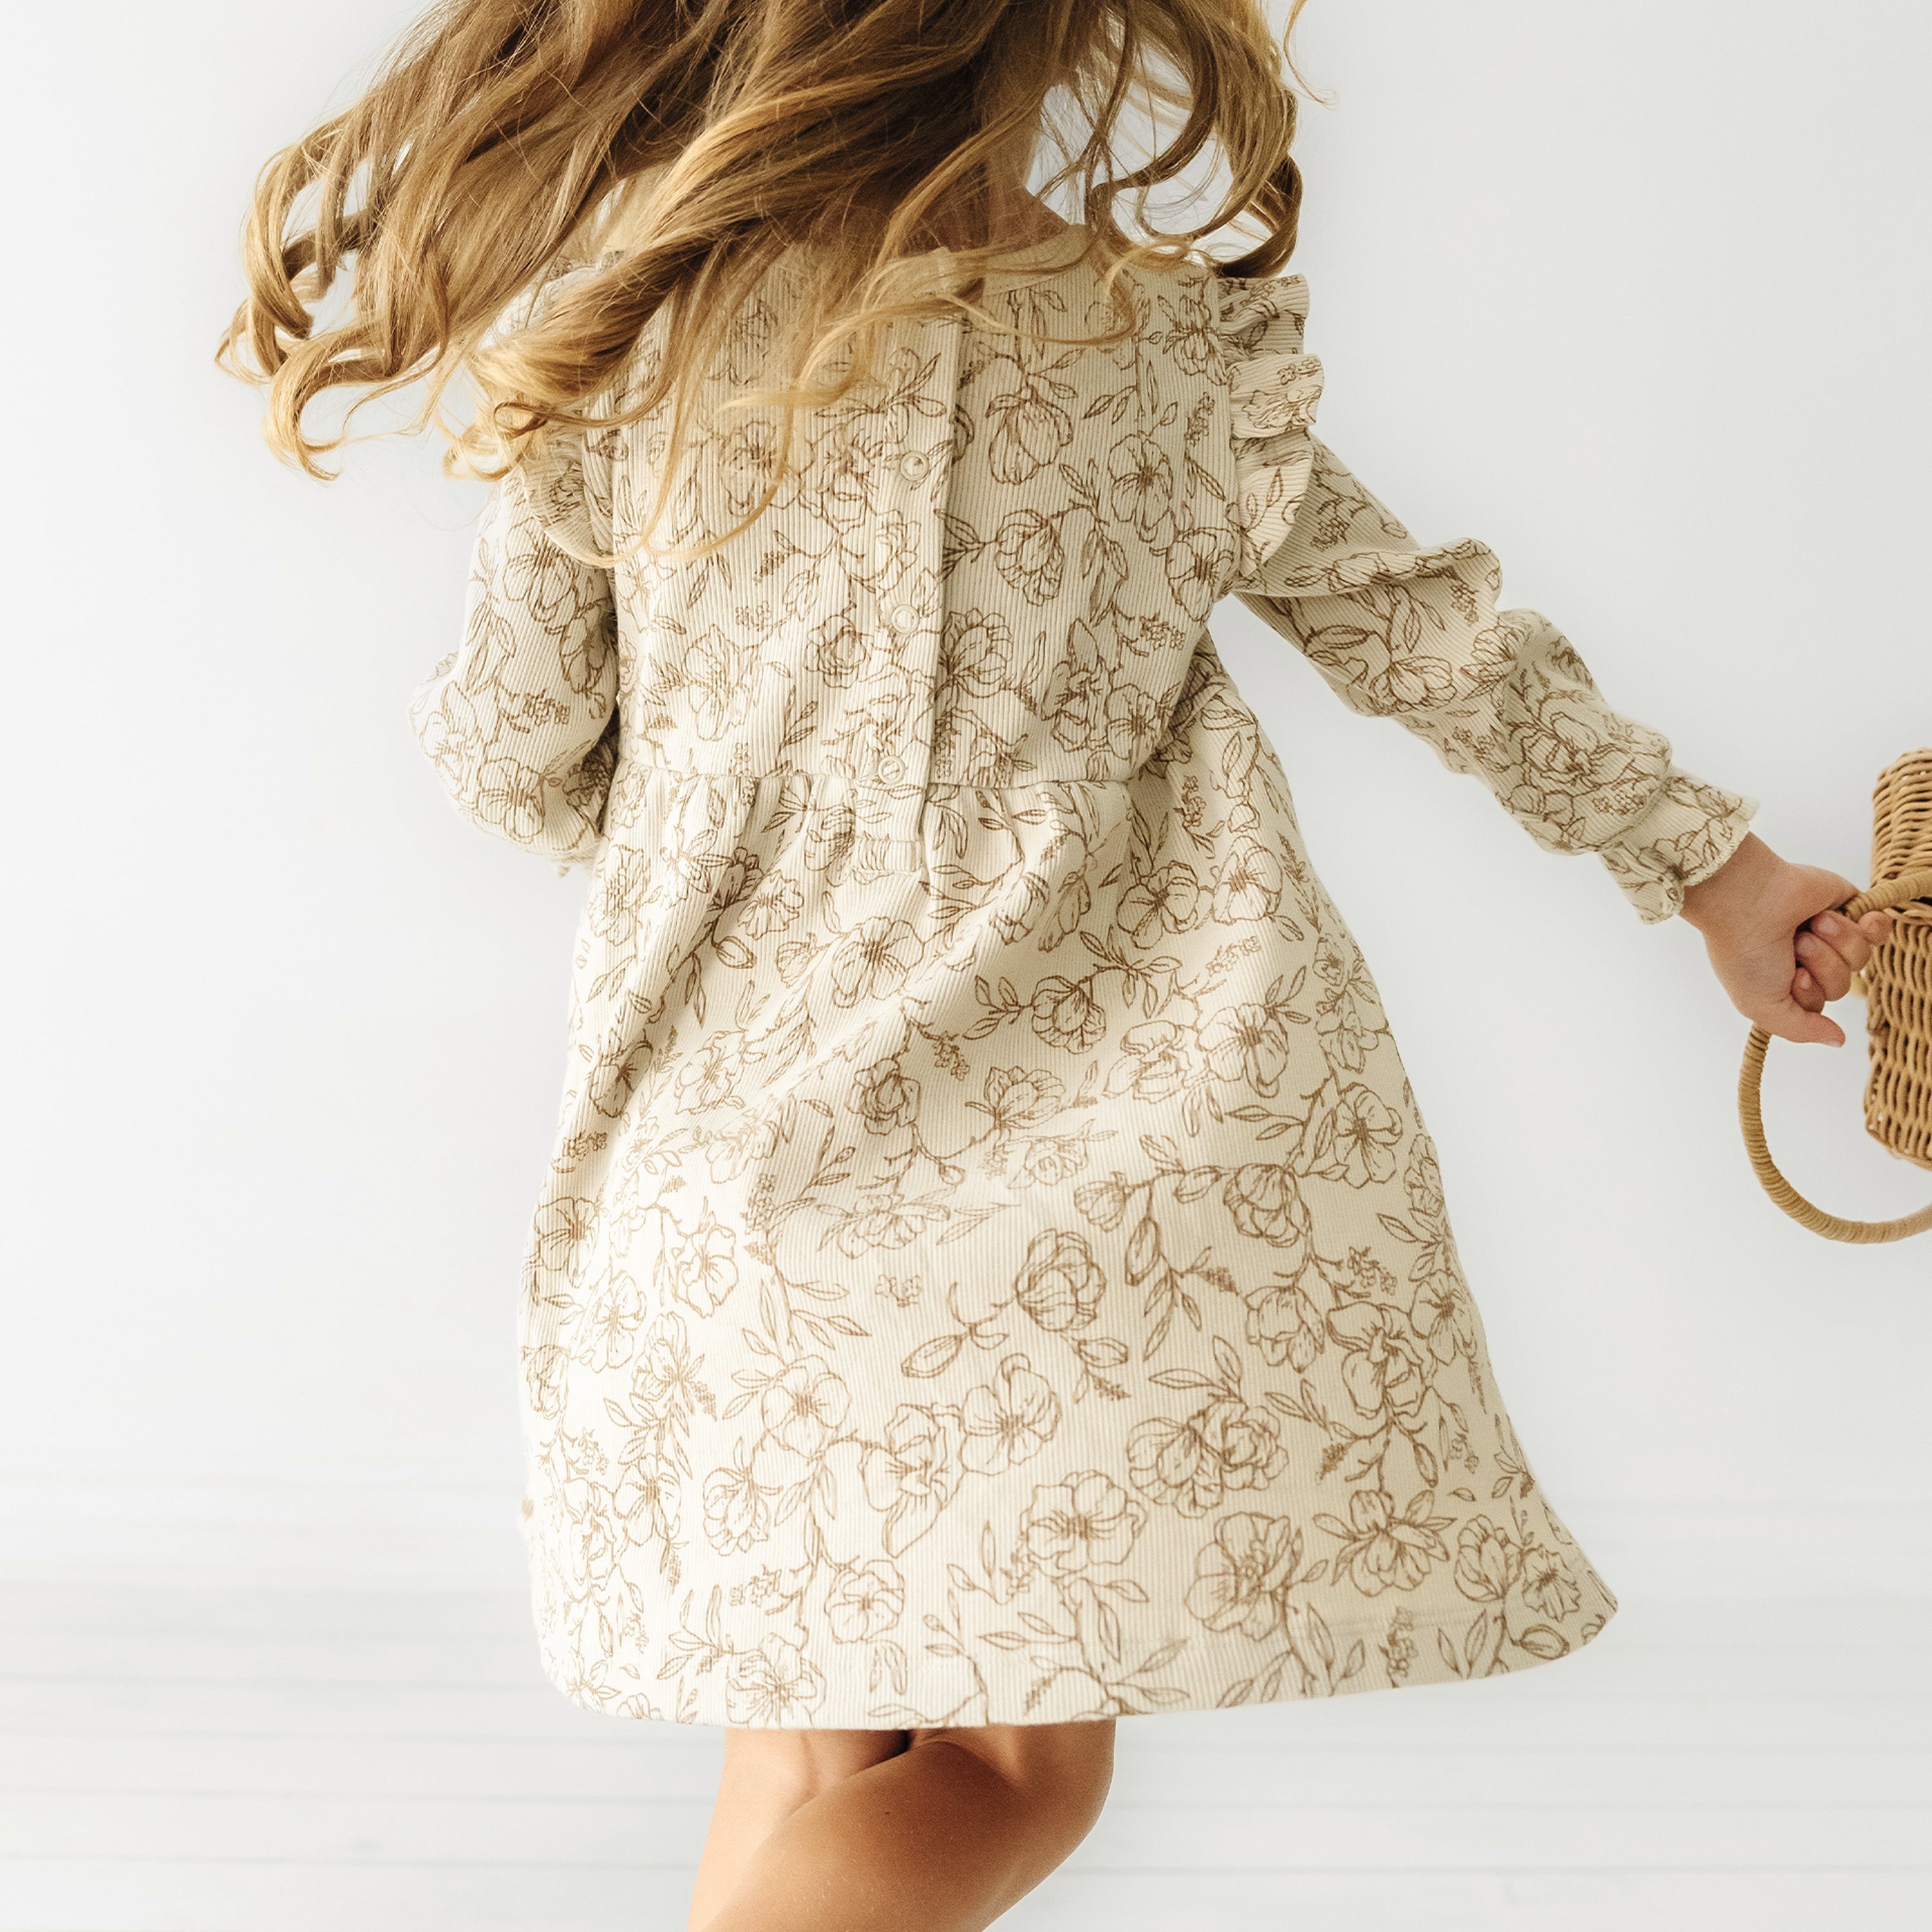 A young girl from the back wearing a Organic Girls Vintage Bloom floral dress and holding a wicker bag, her hair caught in motion, against a bright white background.